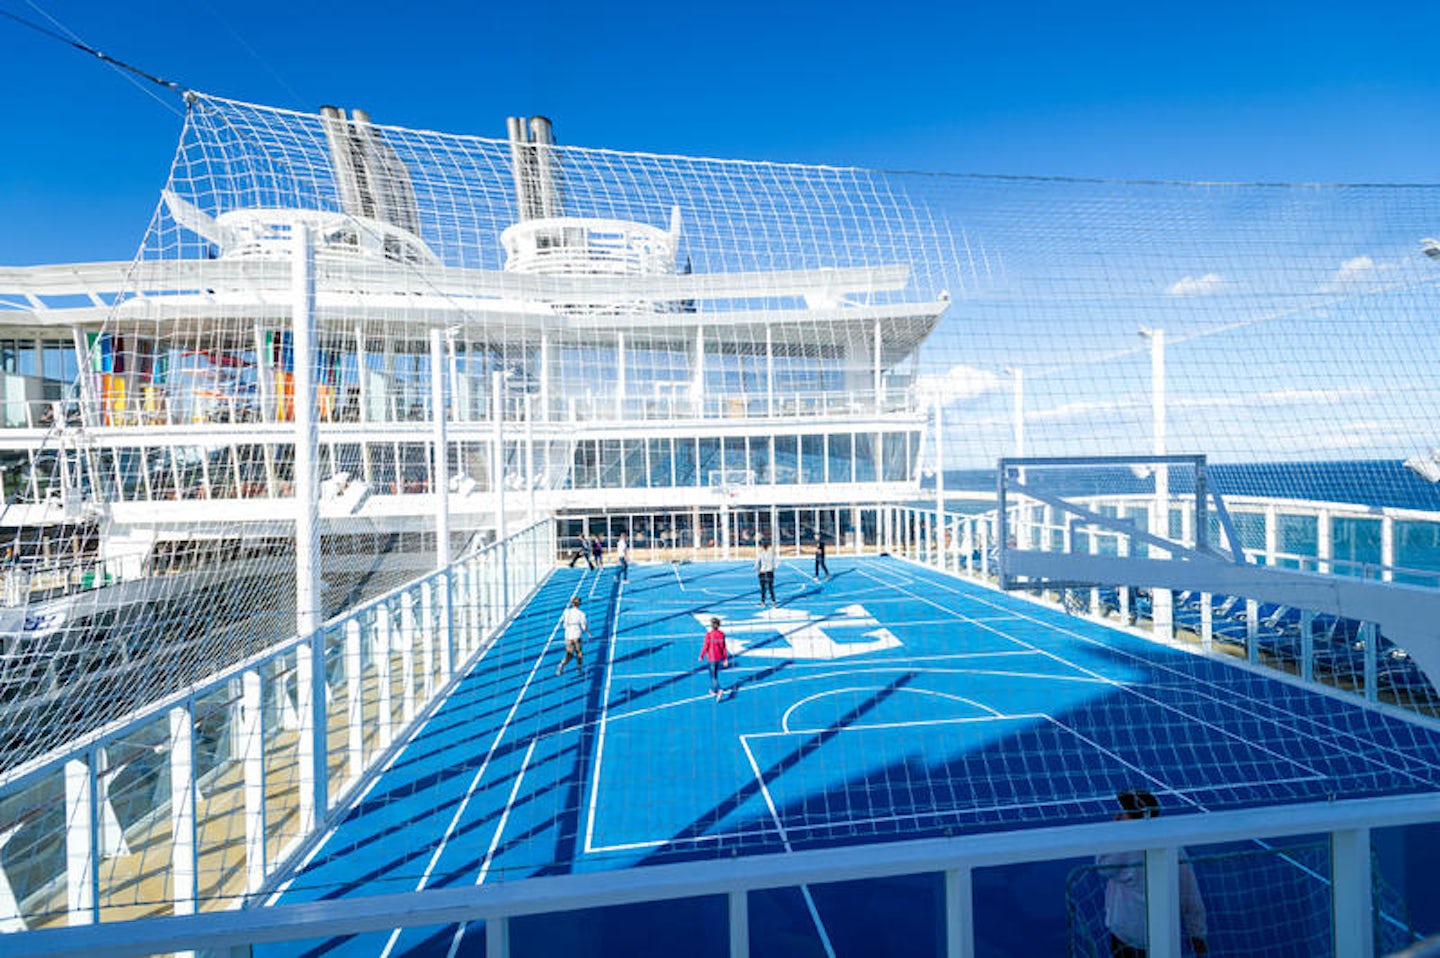 Sports Court on Symphony of the Seas